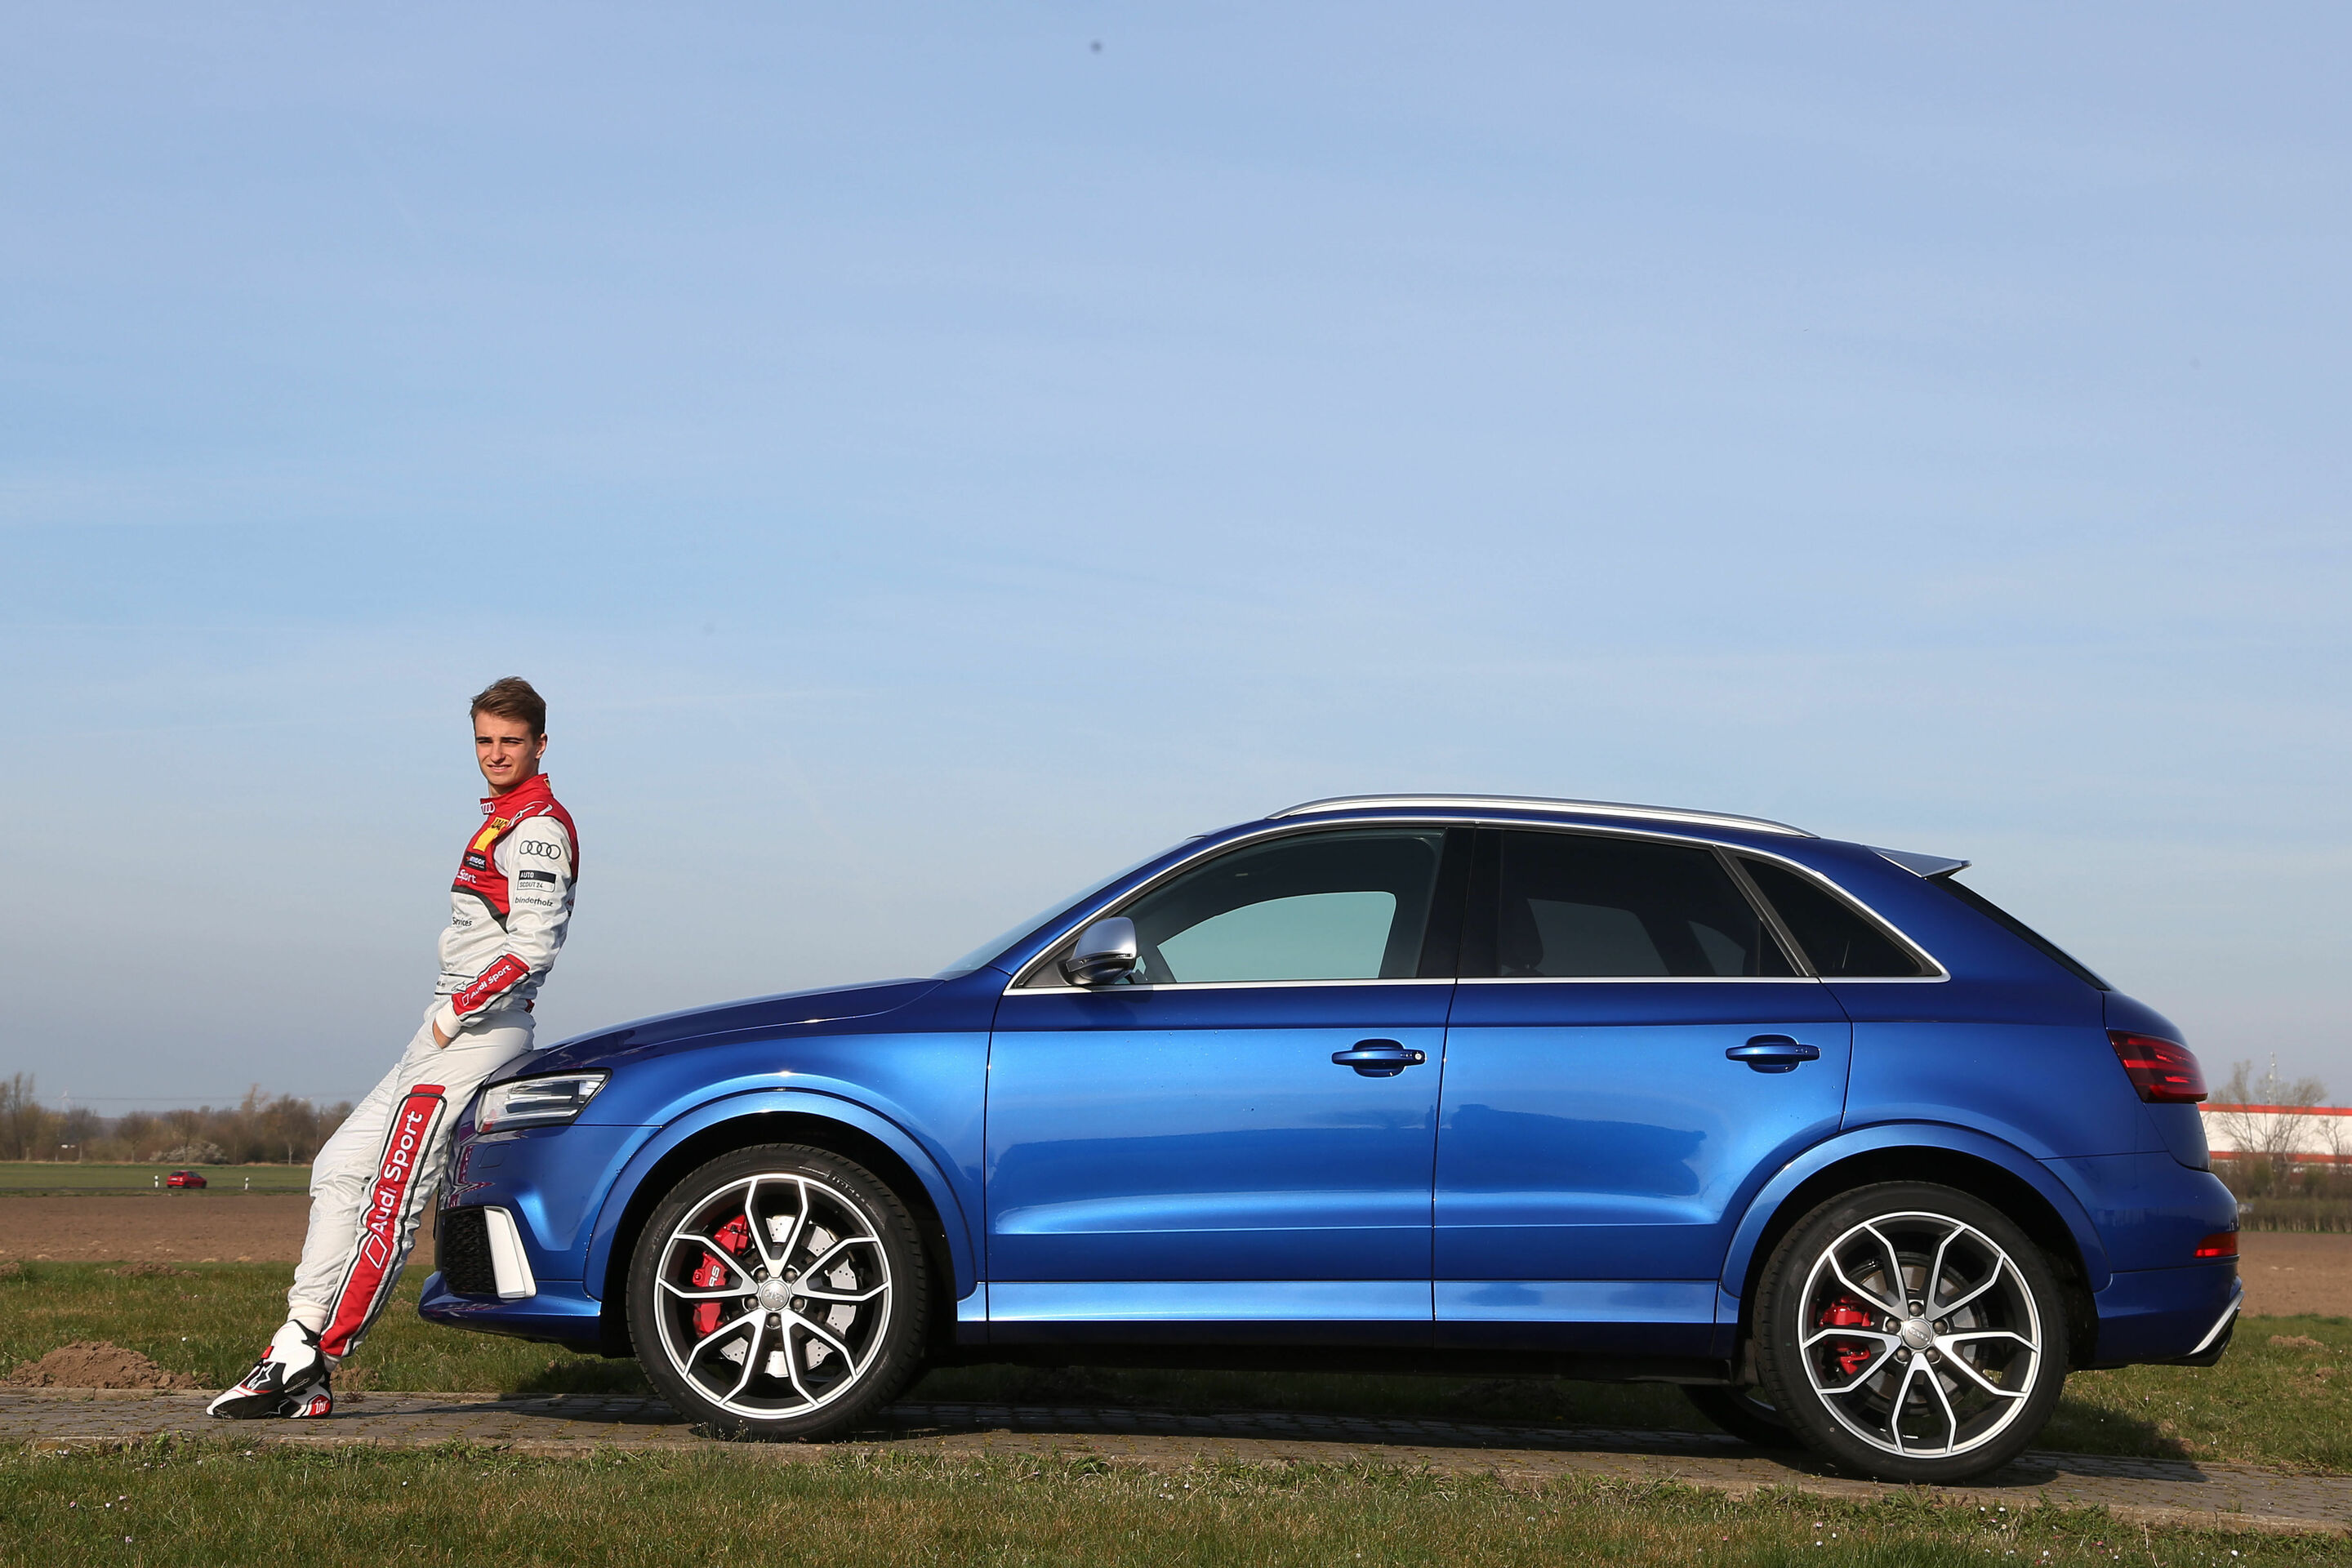 Audi race drivers and RS models